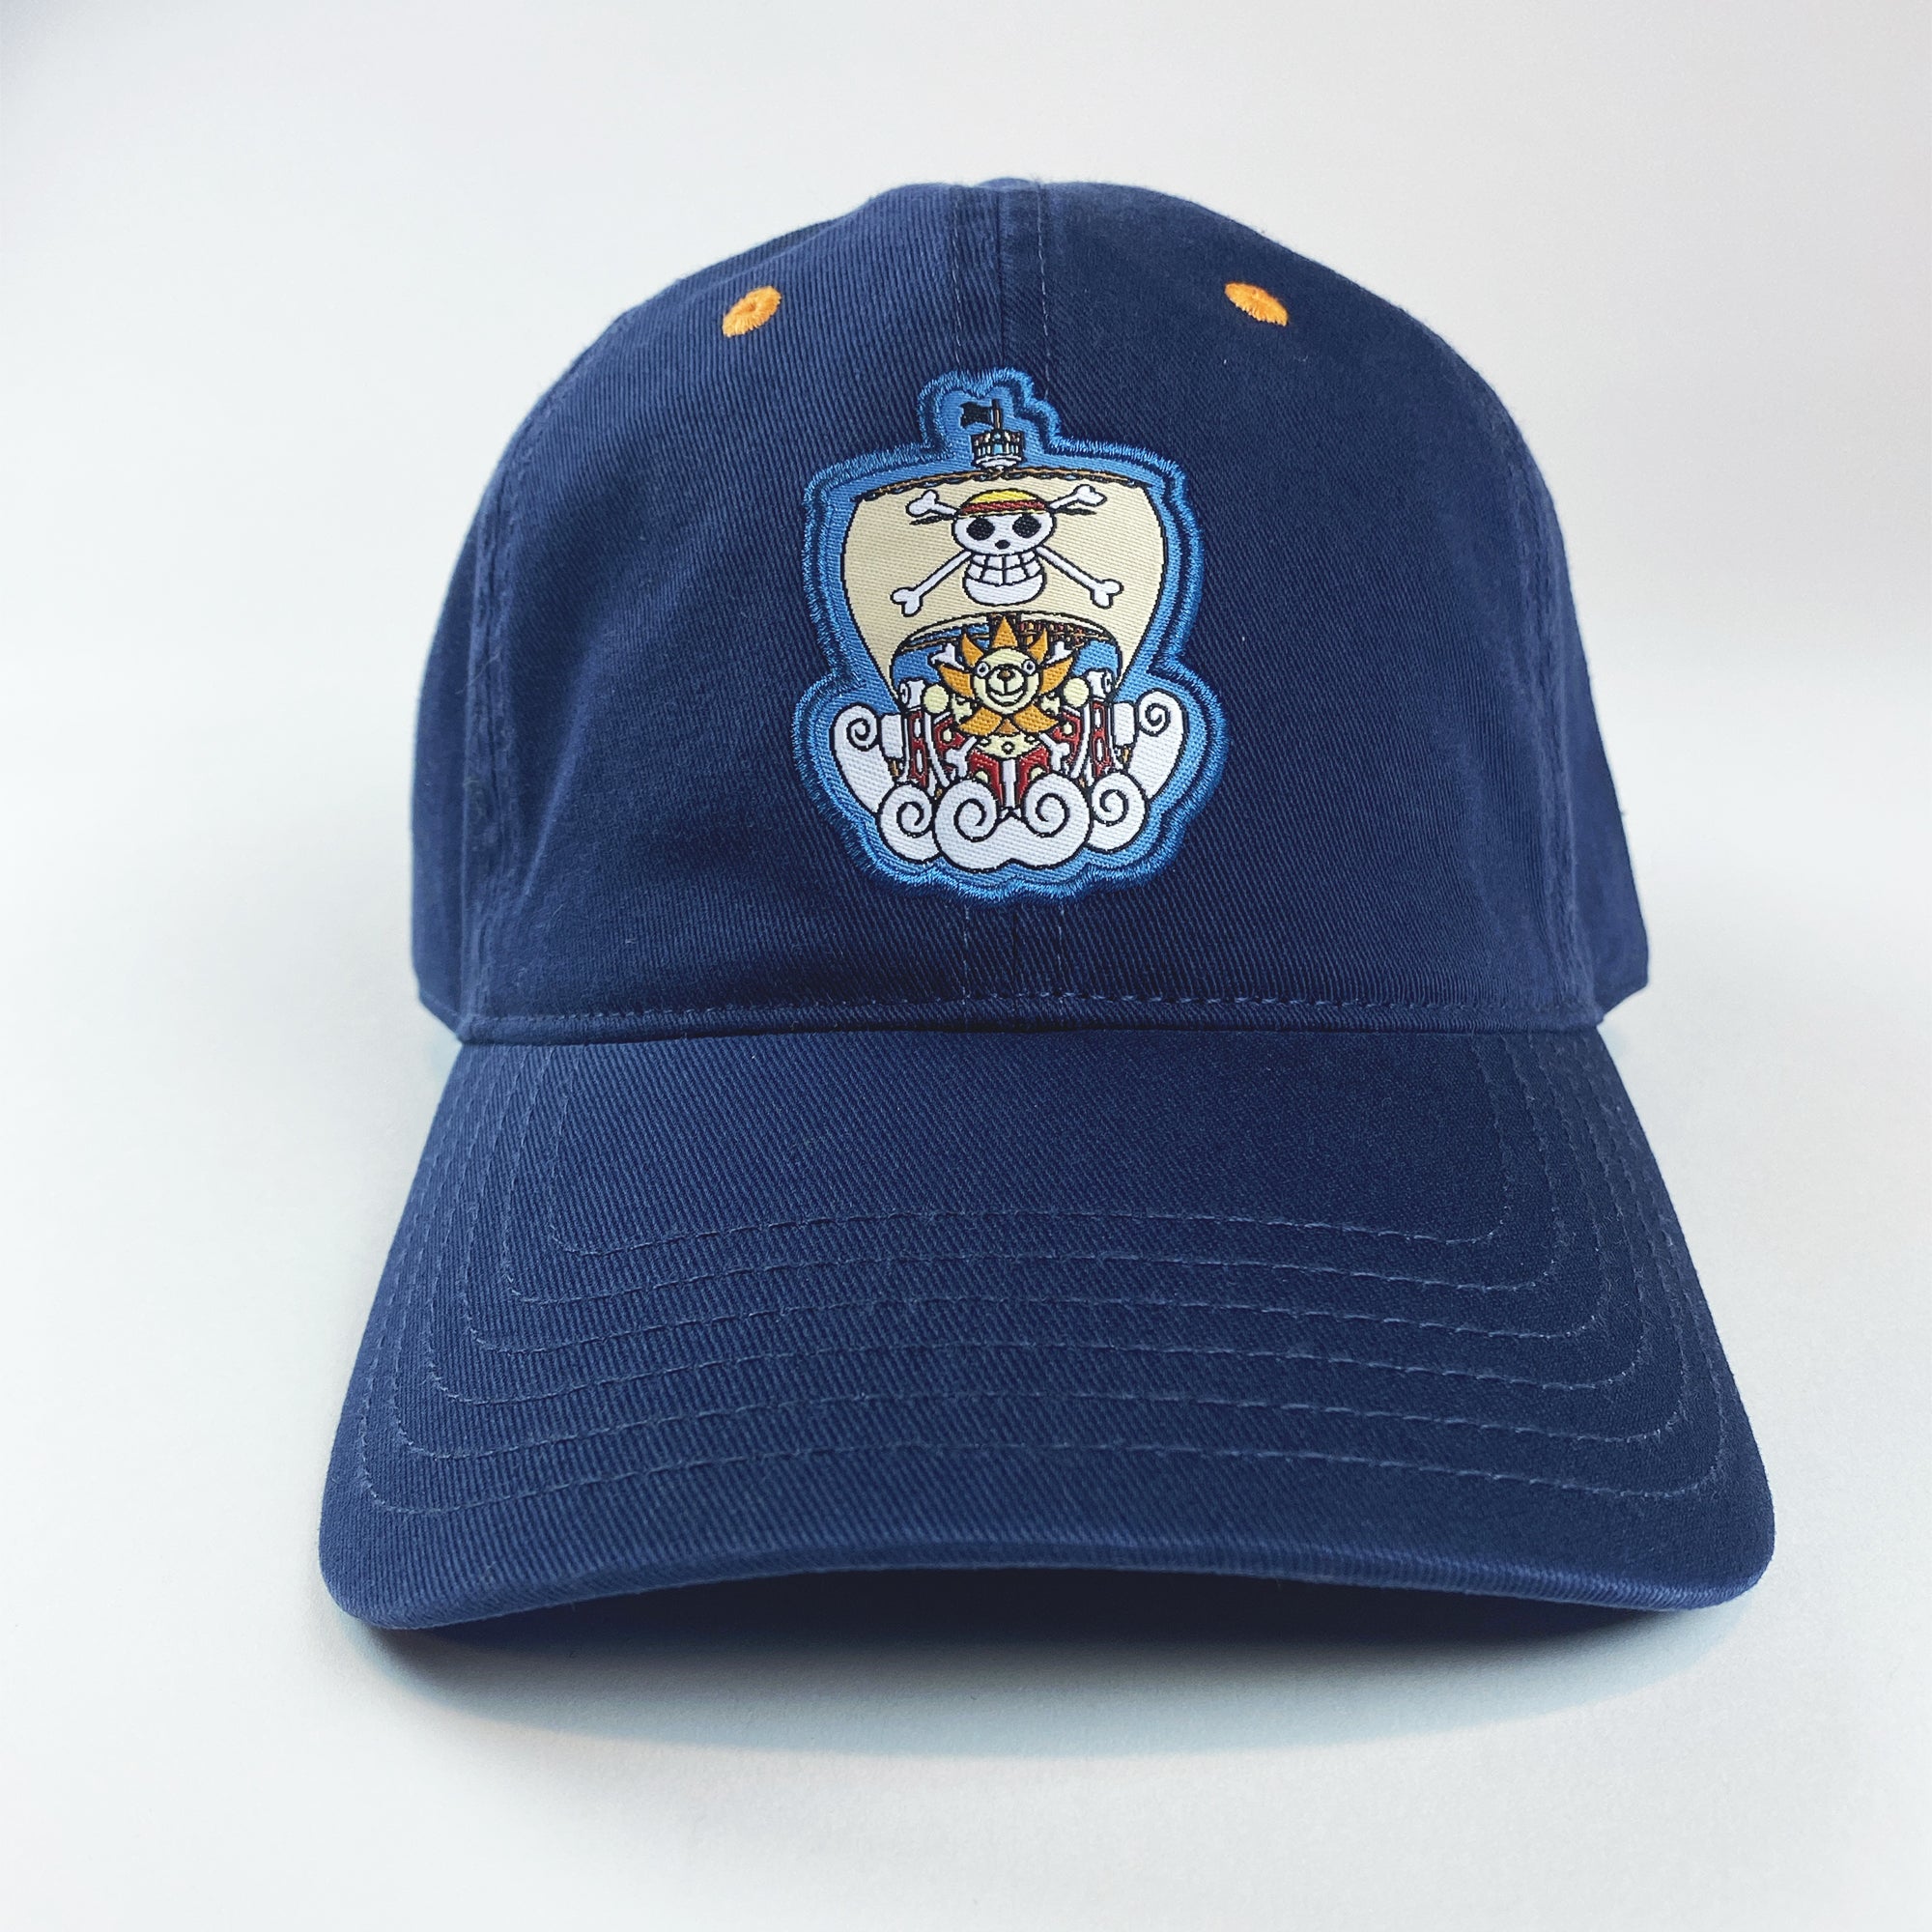 One Piece - Thousand Sunny Dad Hat image count 0